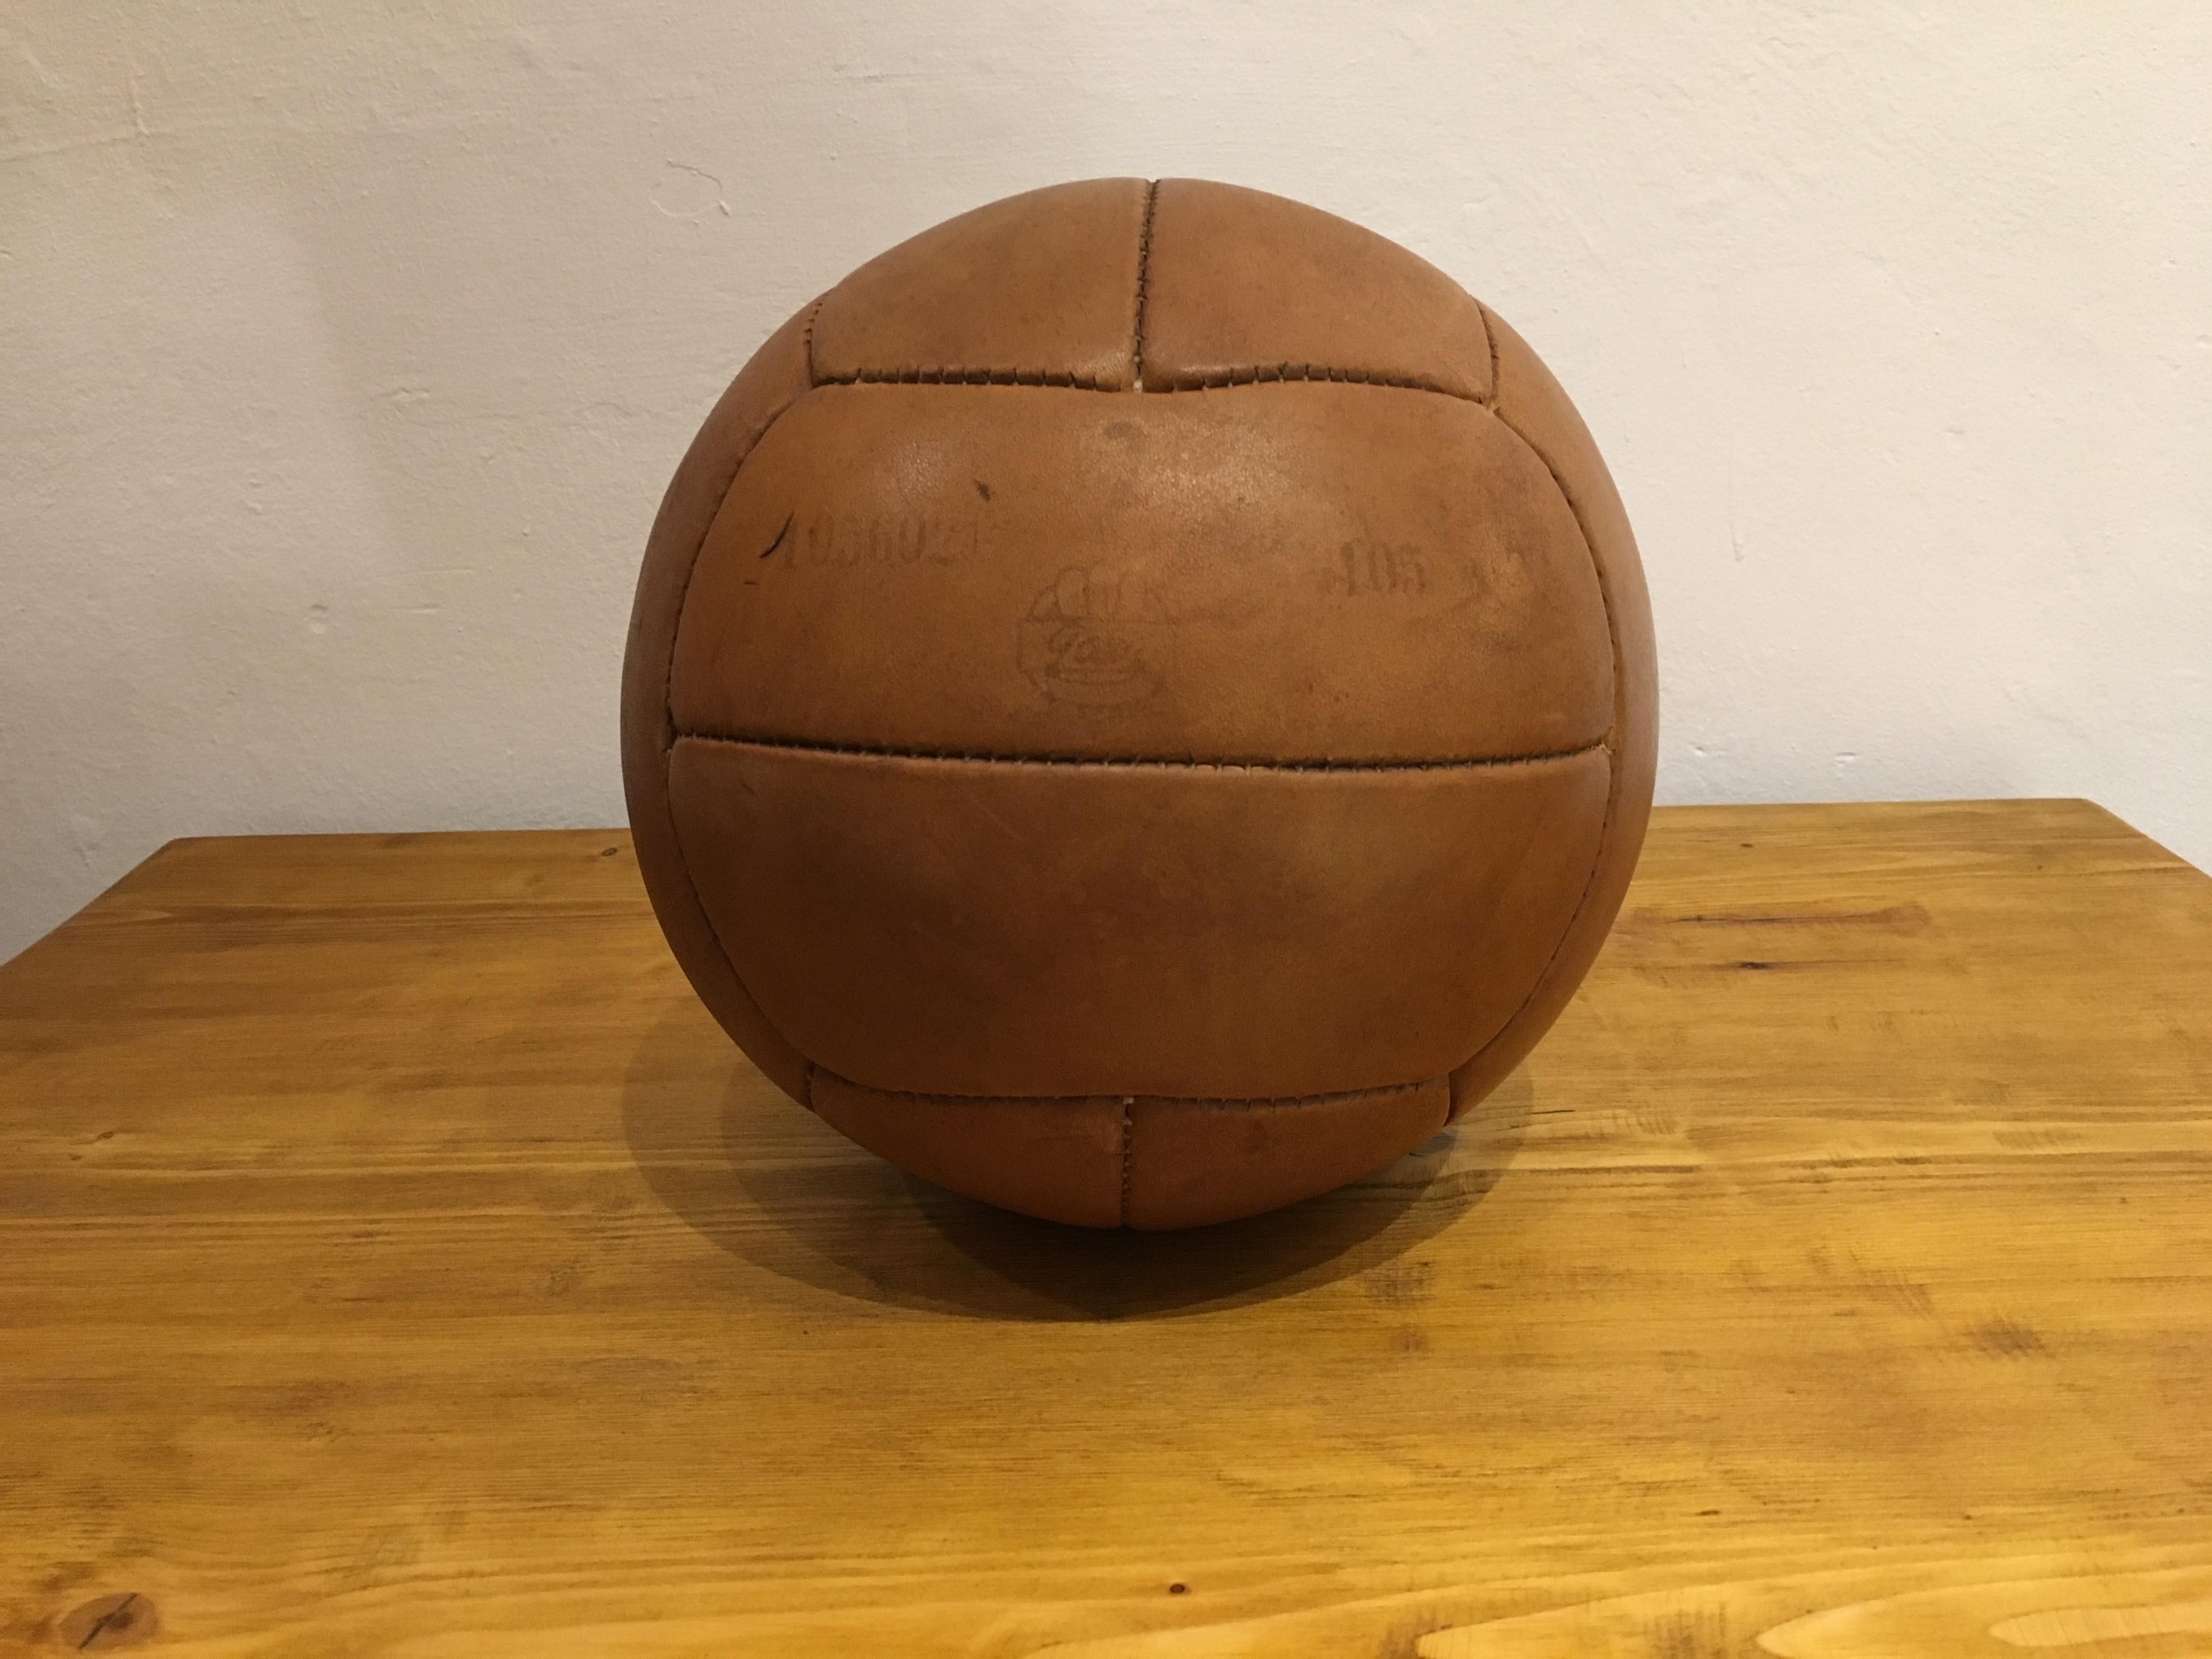 This medicine ball comes from the stock of an old Czech gymnasium. Made in the 1930s. Patina consistent with age and use. Cleaned and treated with a special leather care. Weight: 2kg. Measures: Diameter 9.4 inch.